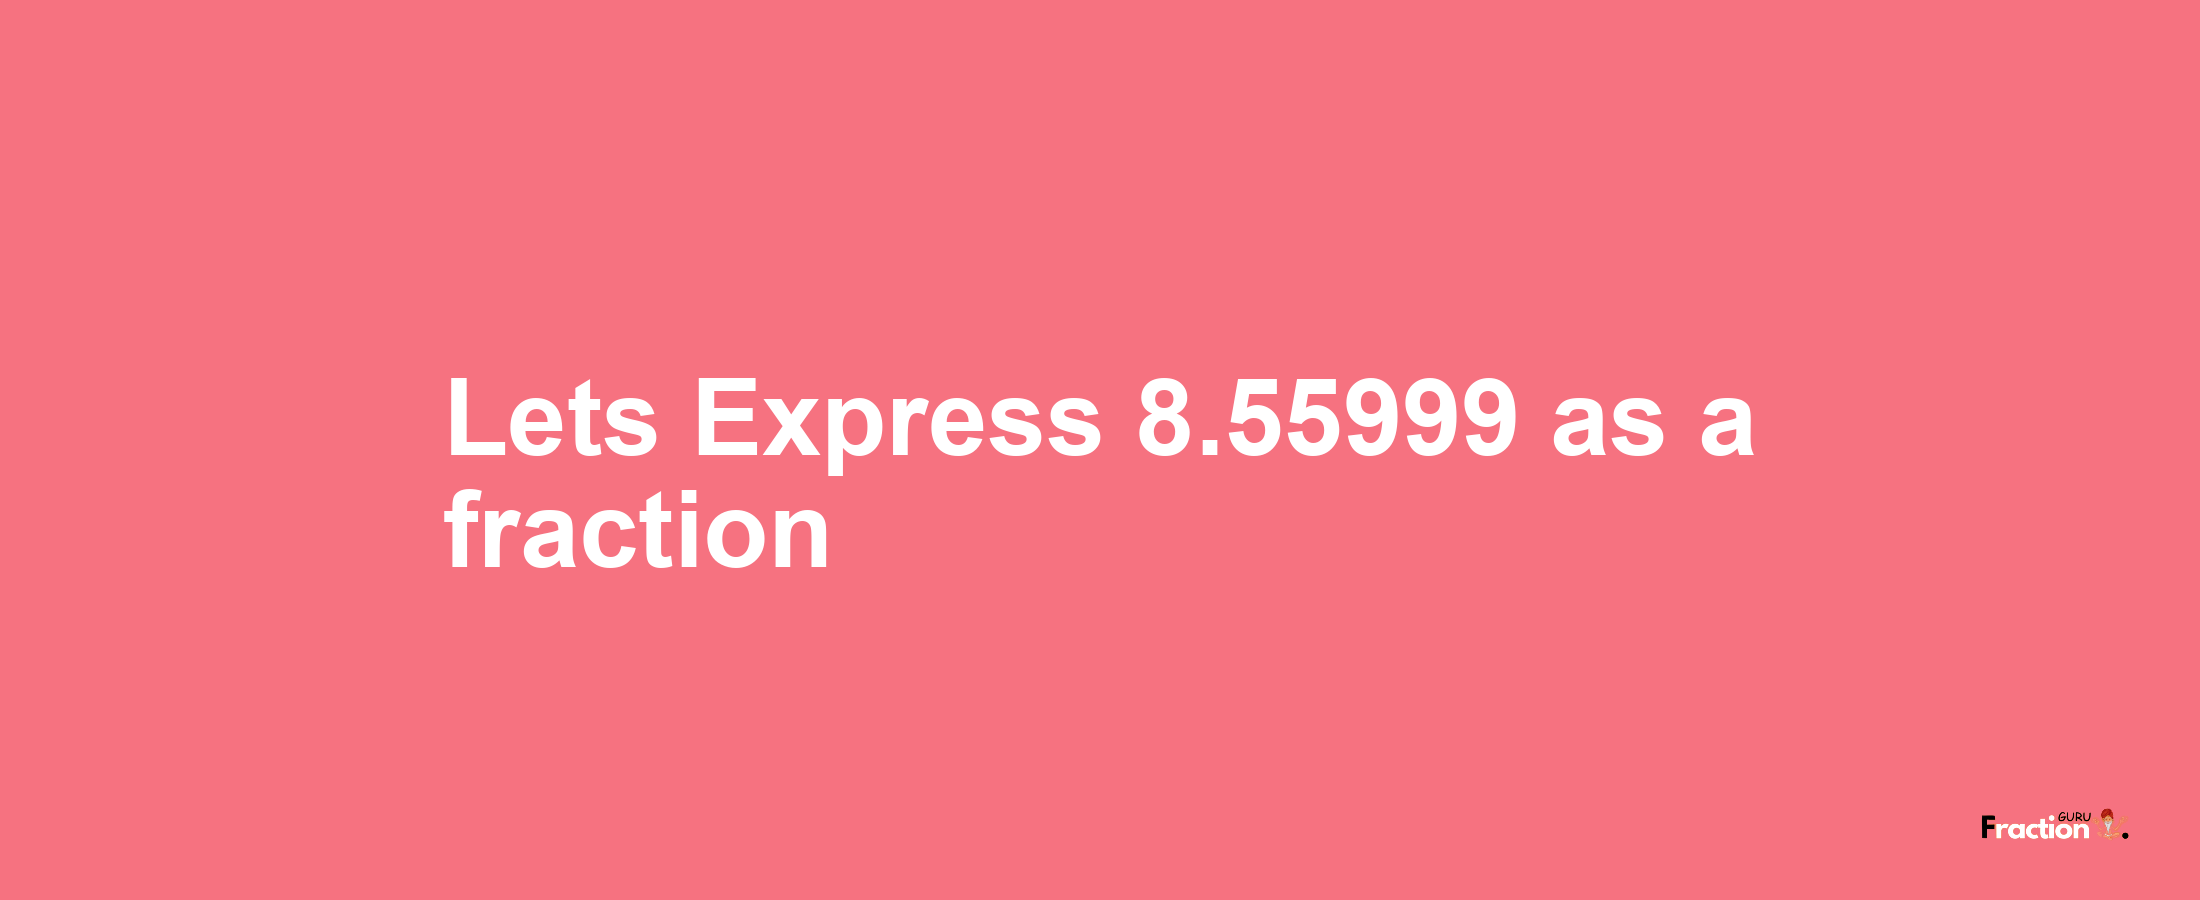 Lets Express 8.55999 as afraction